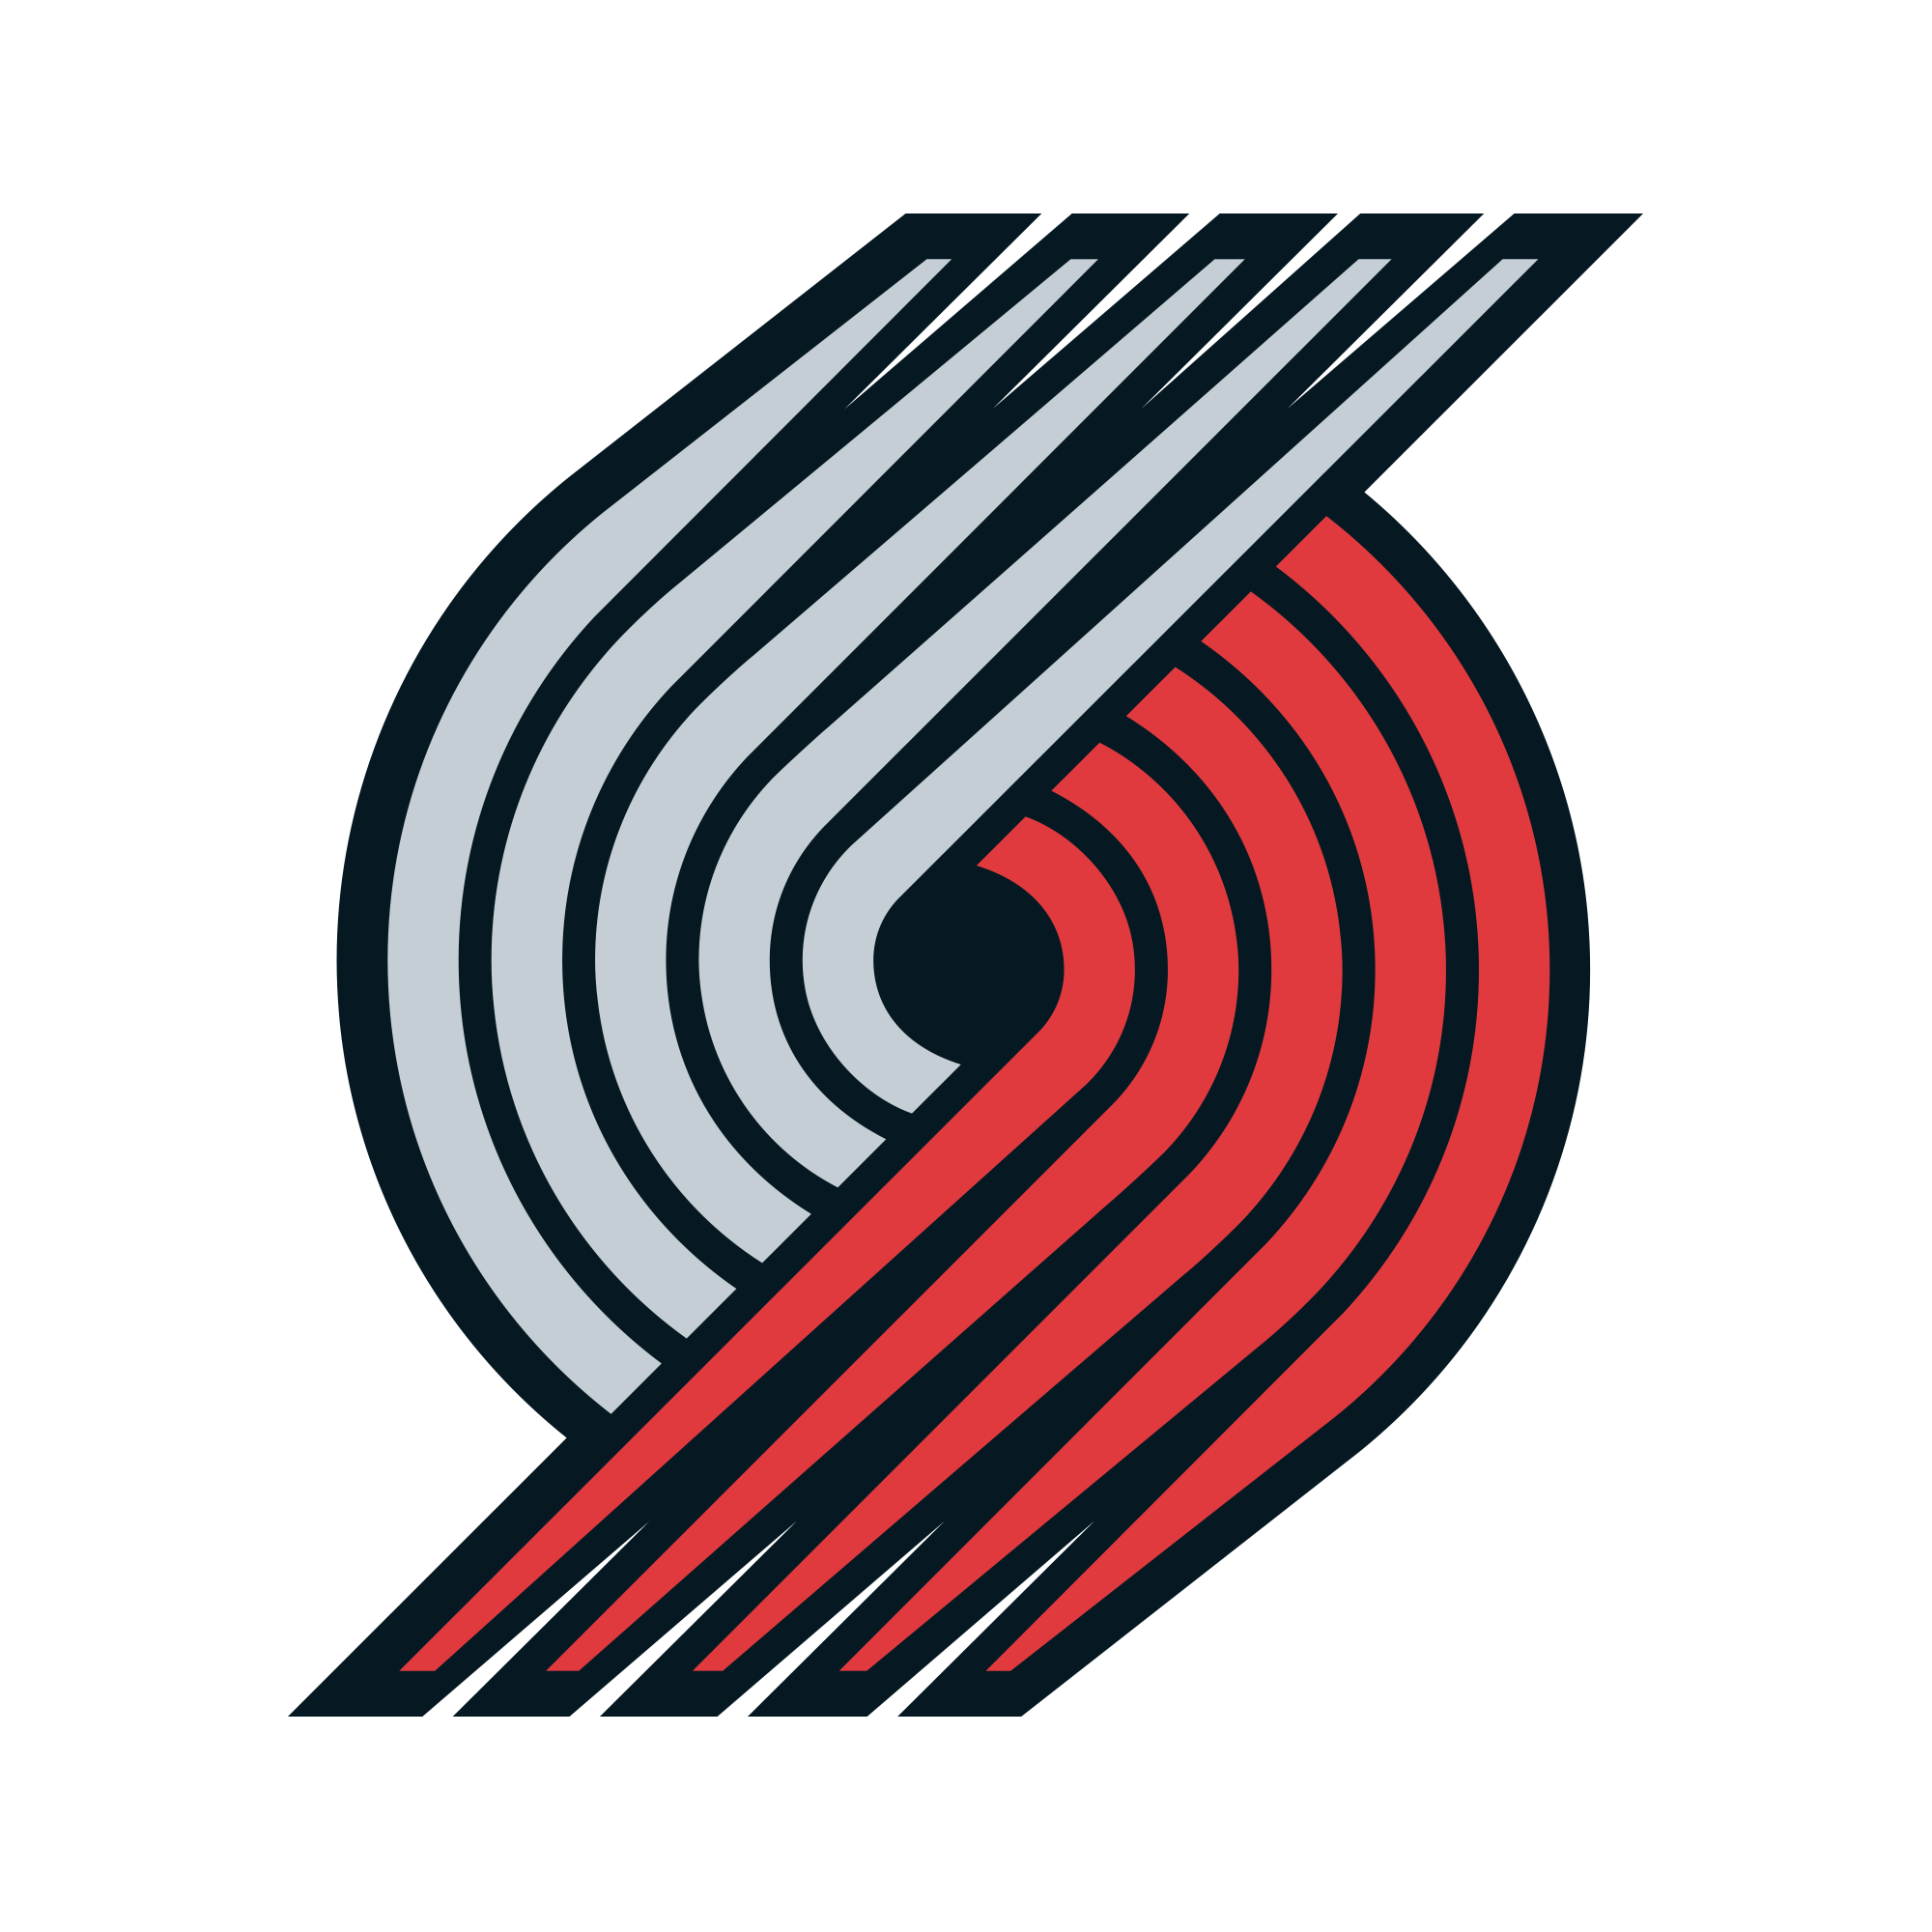 Trail Blazers Named Potential Trade Partner for Clippers SG Paul